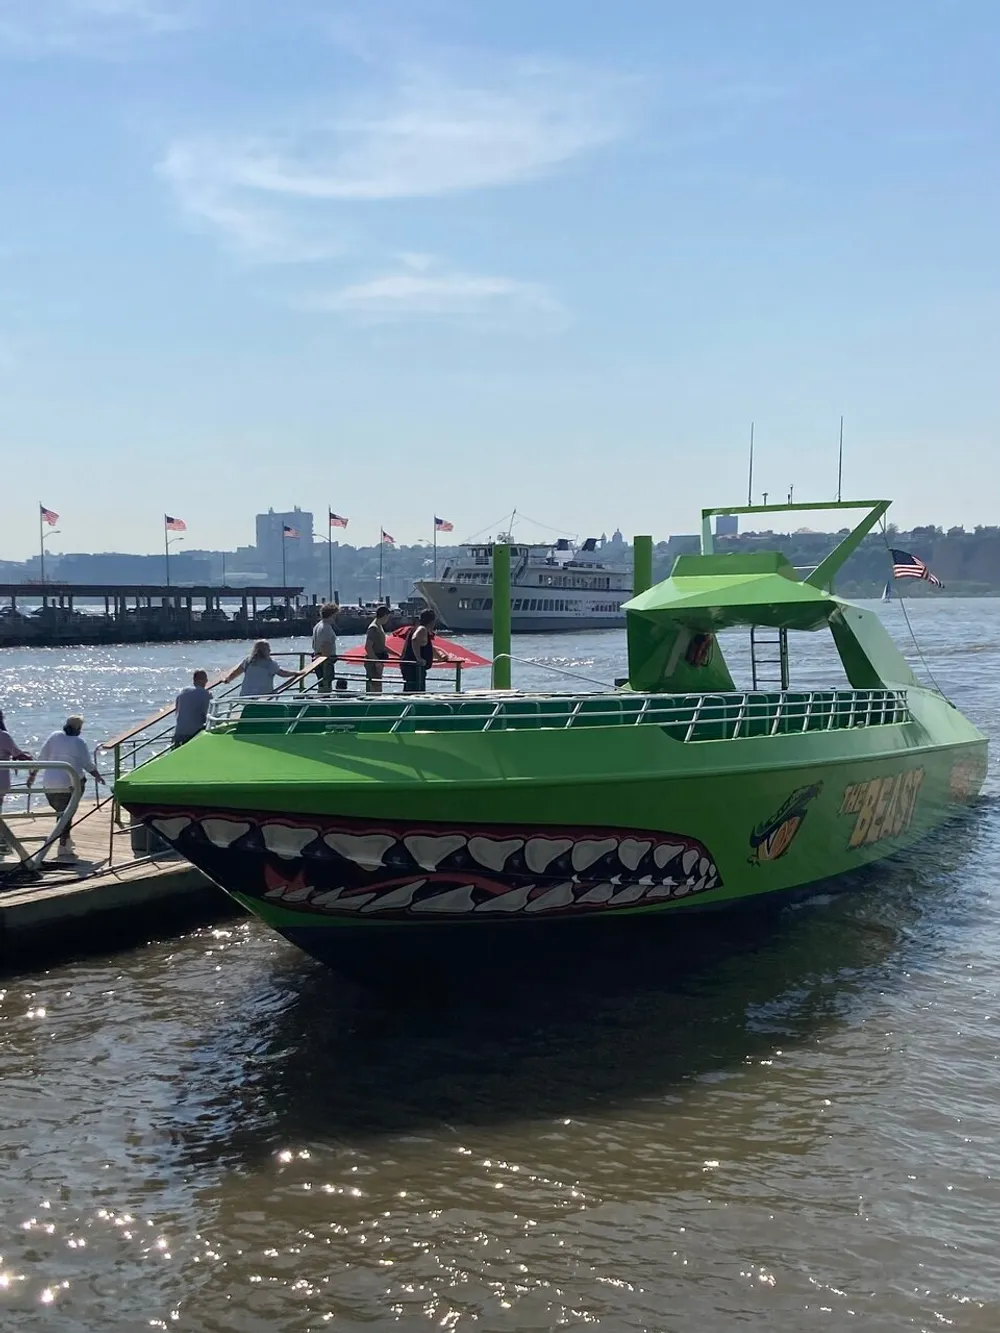 The image shows a green tour boat with shark teeth graphics docked at a pier with passengers aboard on a sunny day